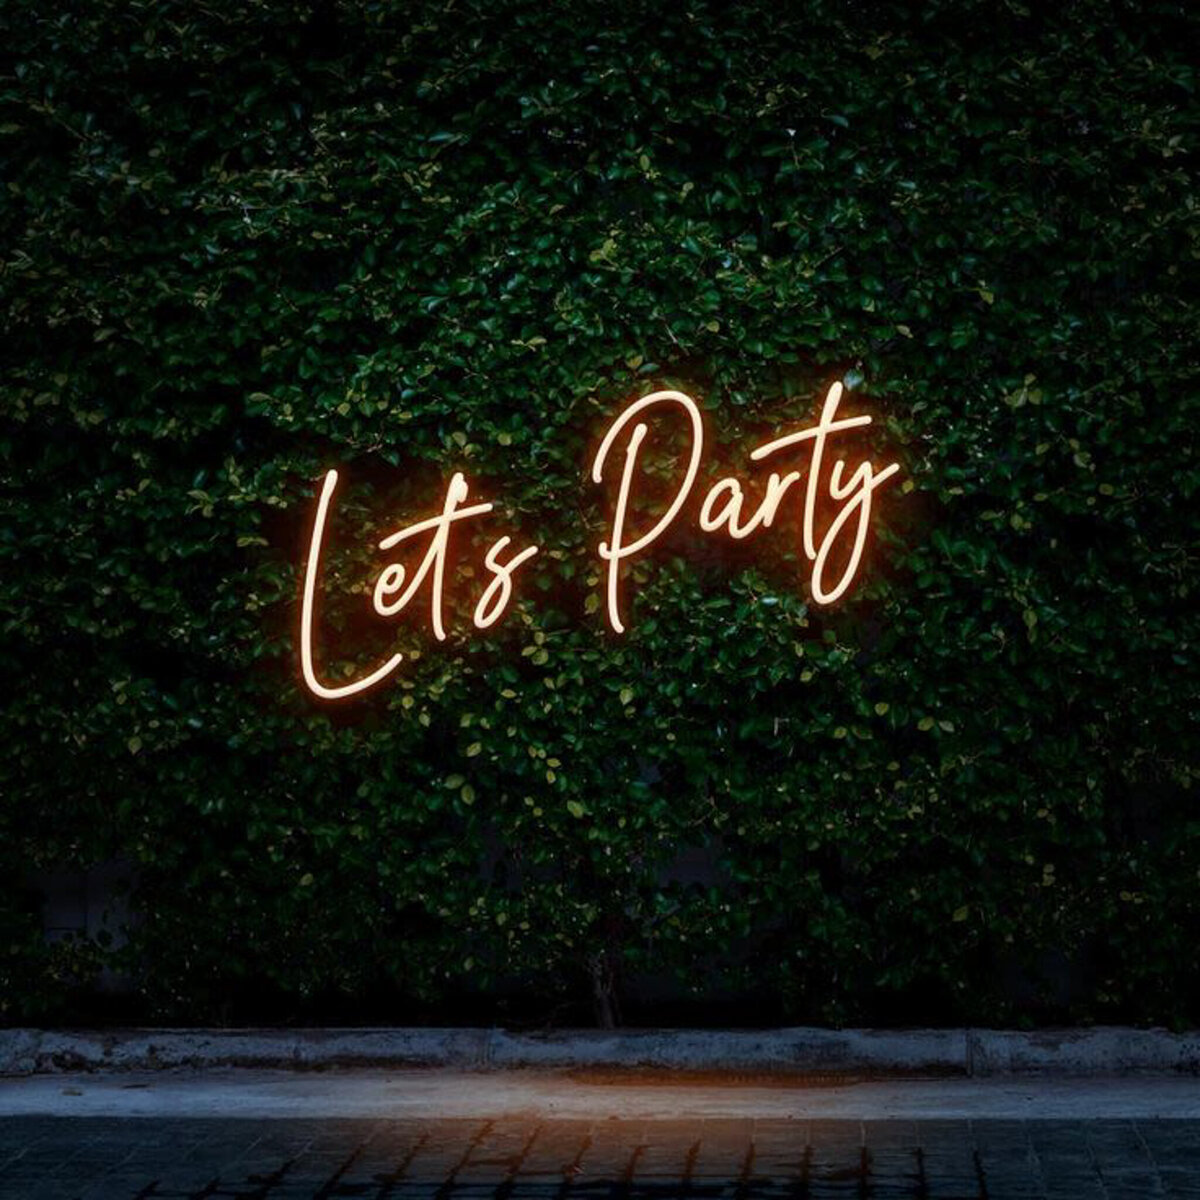 Let's Party sign from Love In Bloom, neon sign decor rentals based in Lethbridge, AB. Featured on the Brontë Bride Vendor Guide.